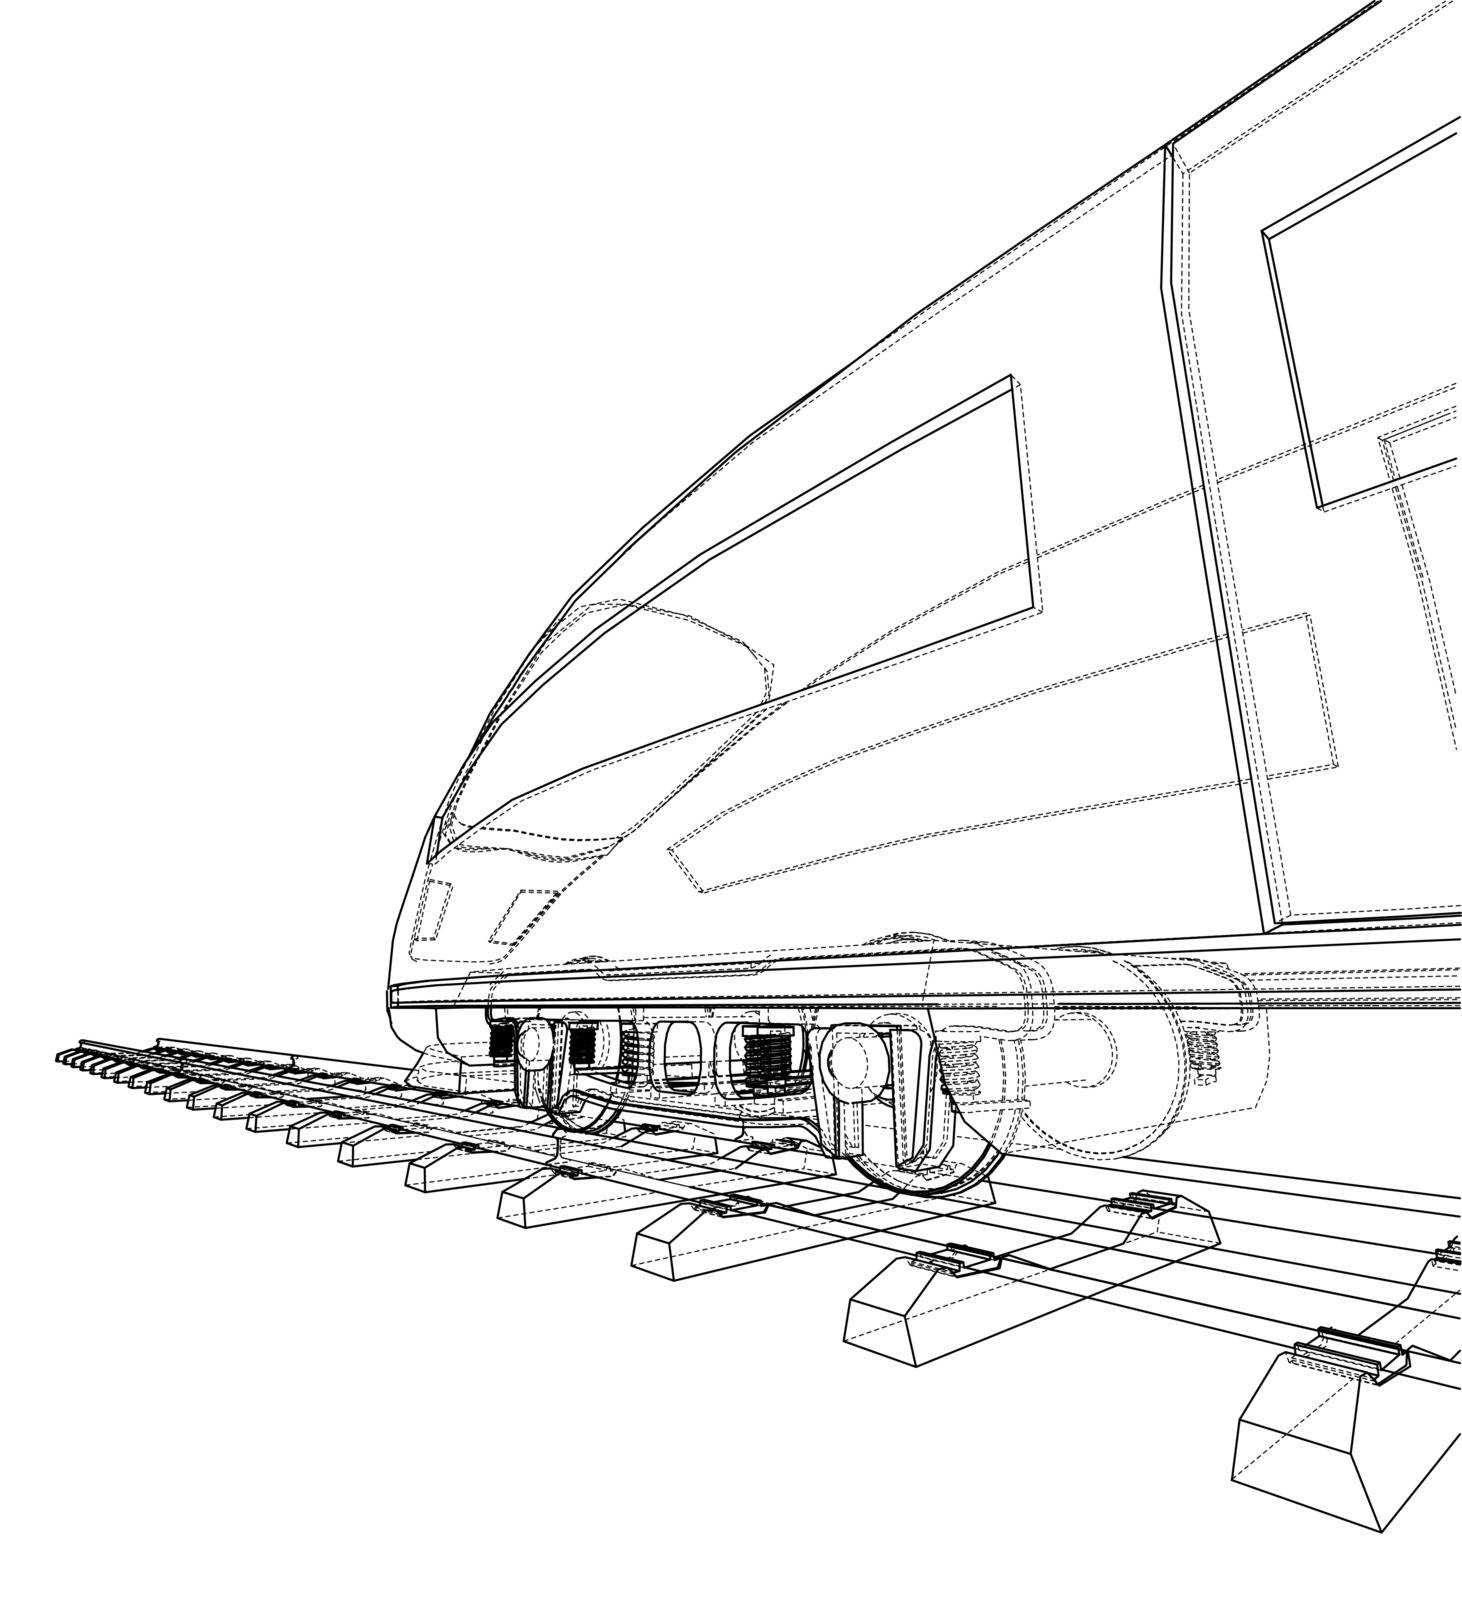 Modern speed train concept. Vector rendering of 3d. Wire-frame style